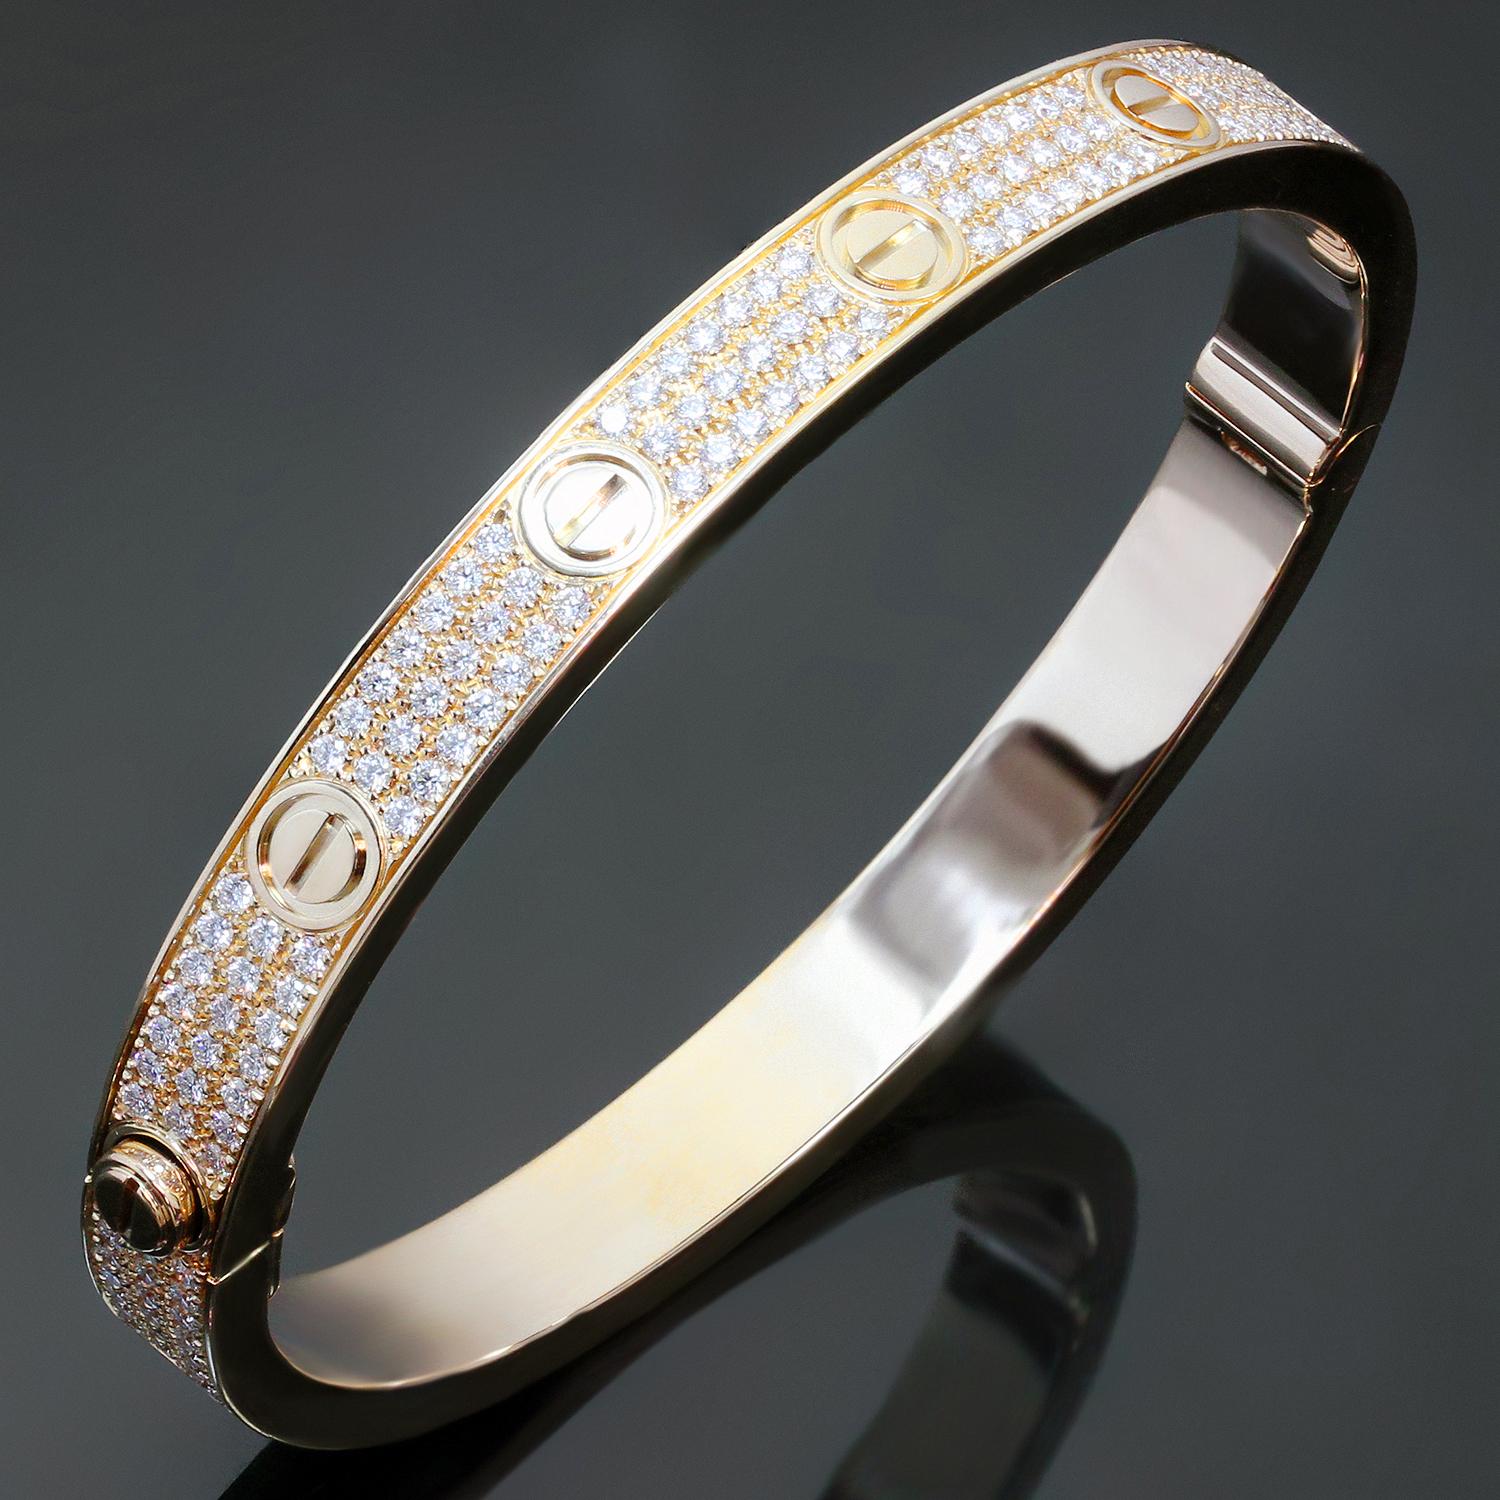 This exquisite Cartier bracelet from the iconic Love collection is crafted in 18k yellow gold and set with 200 brilliant-cut diamonds weighing an estimated 2.00 carats. Made in France circa 2010s. Measurements: 0.25